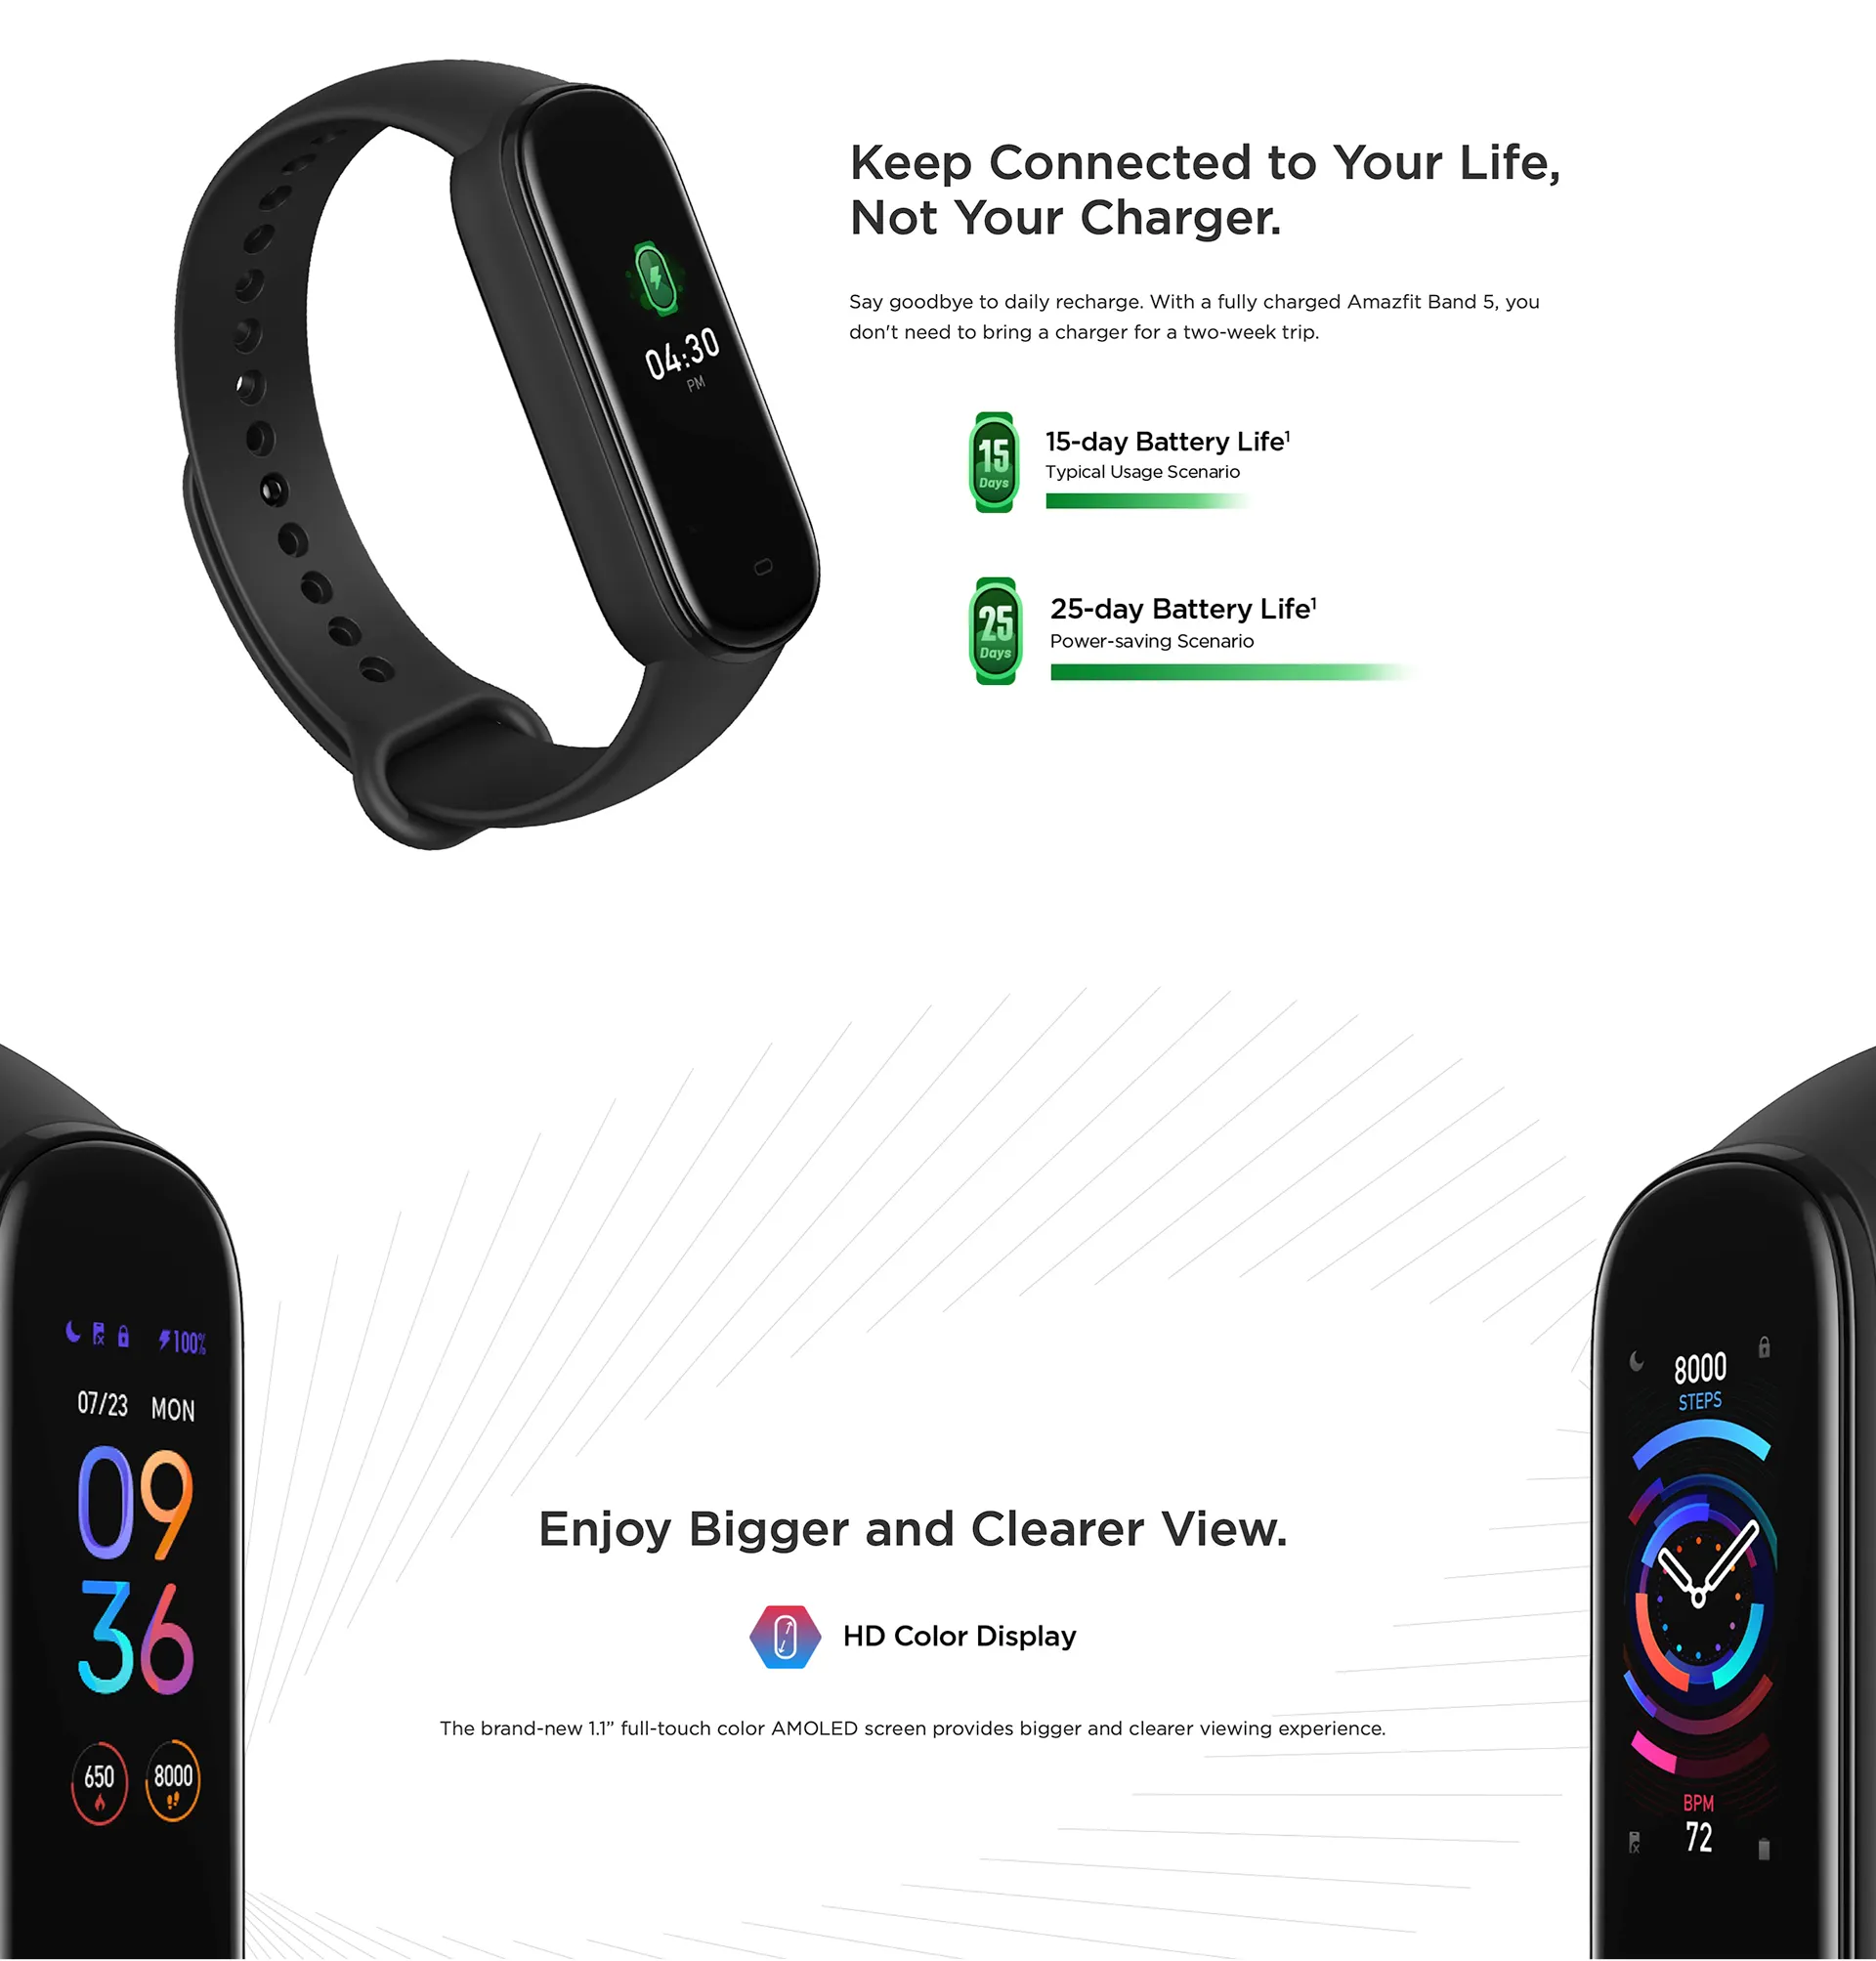 Amazfit Band 5 Smart fitness tracker with spO2010304